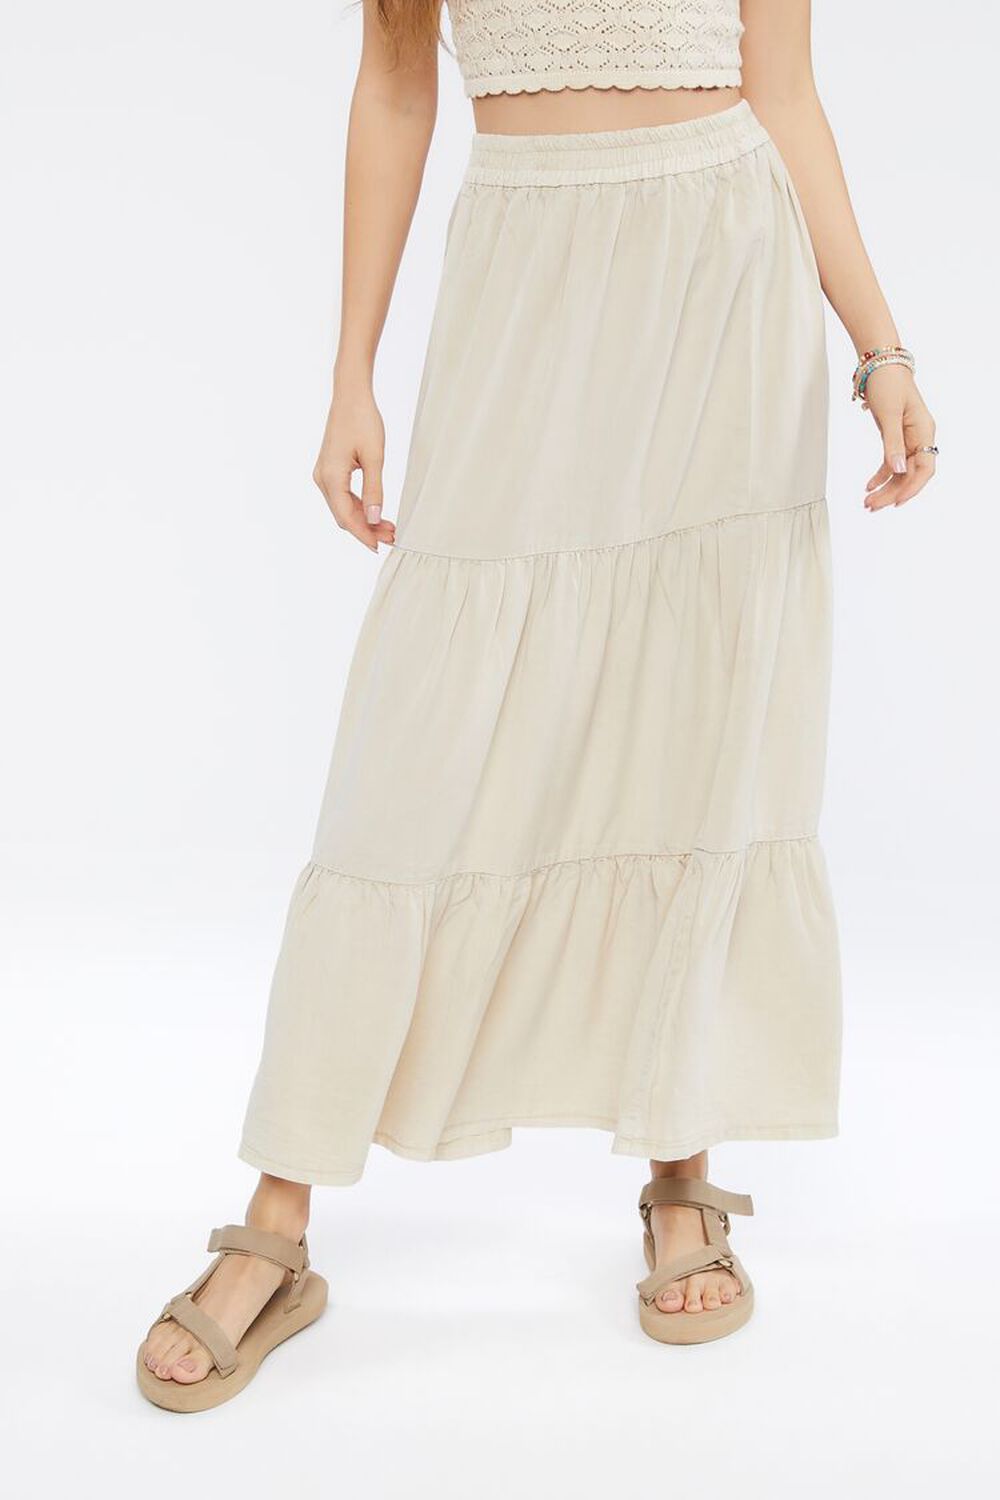 SANDSHELL Tiered High-Rise Maxi Skirt, image 2